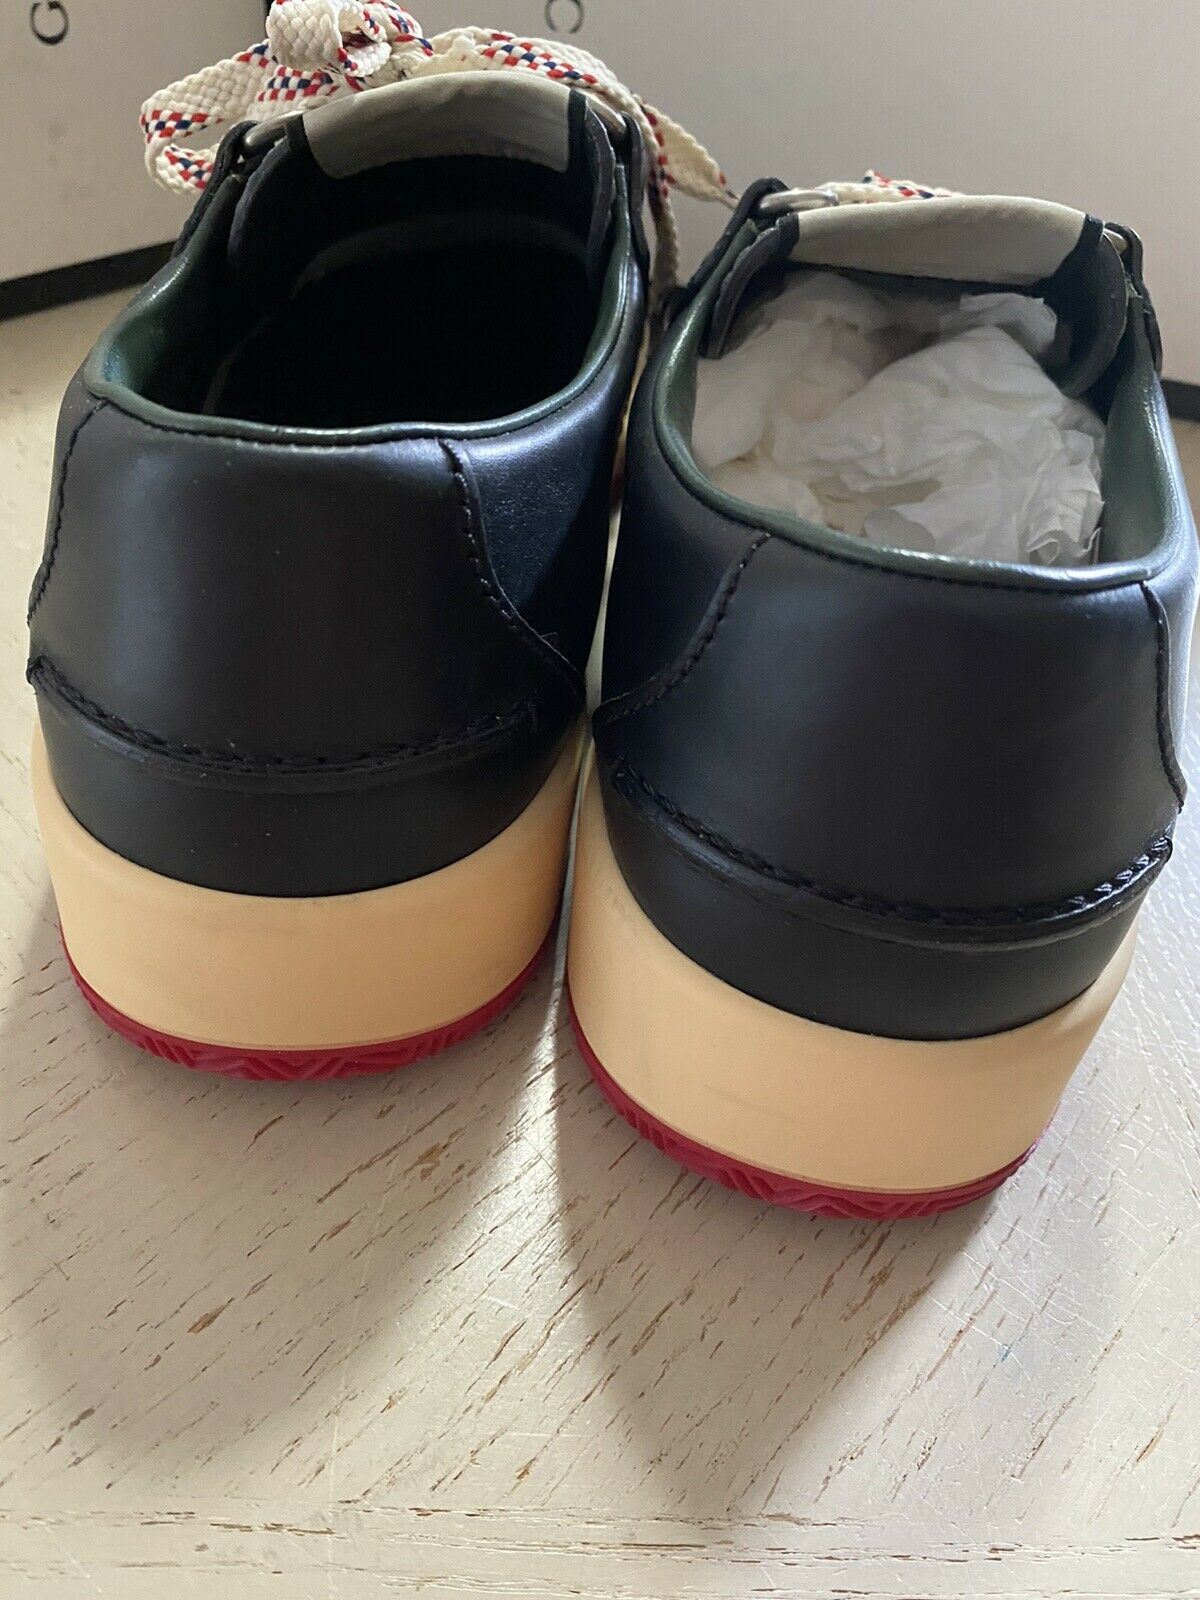 New Gucci Men’s Leather Sneakers Shoes Black 10 US ( 9 UK ) Italy